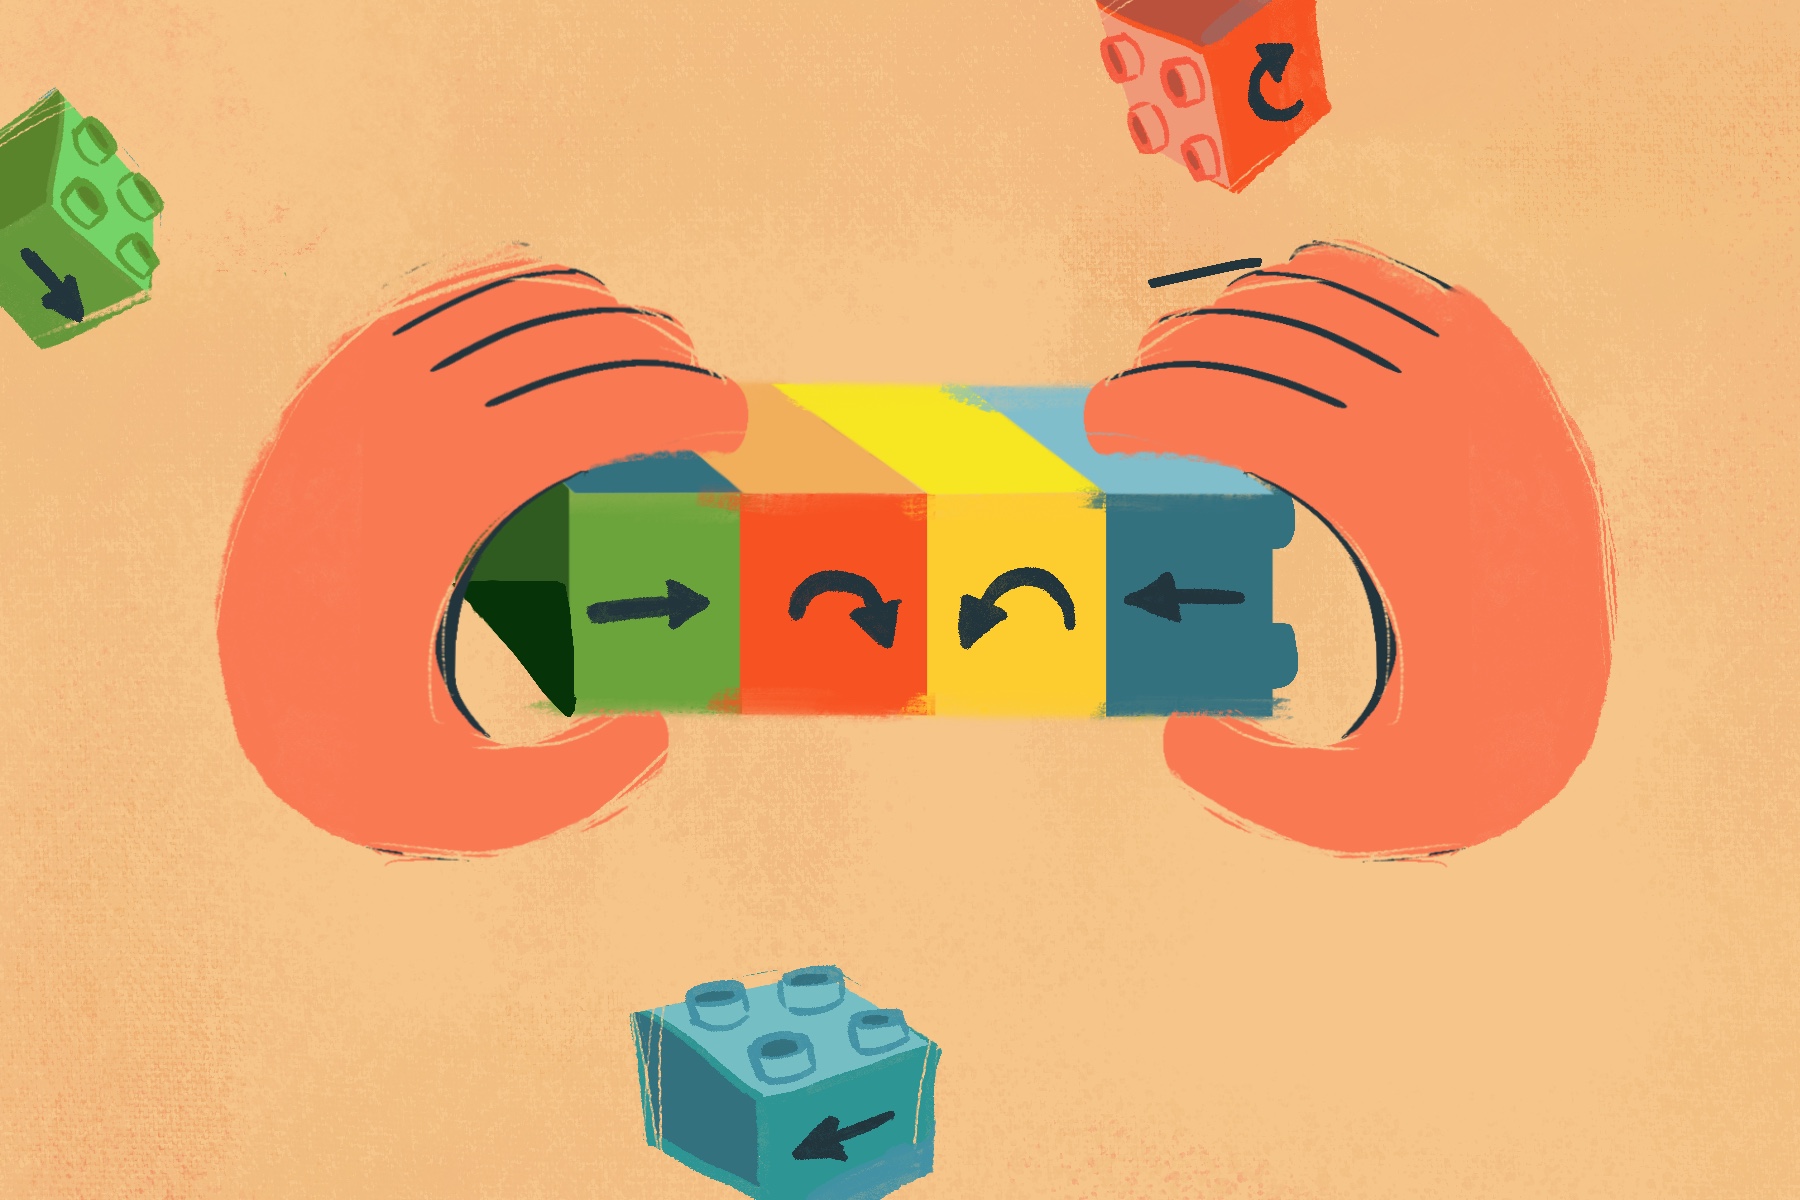 Illustration of hands holding a row of four action blocks surrounded by colourful lego blocks